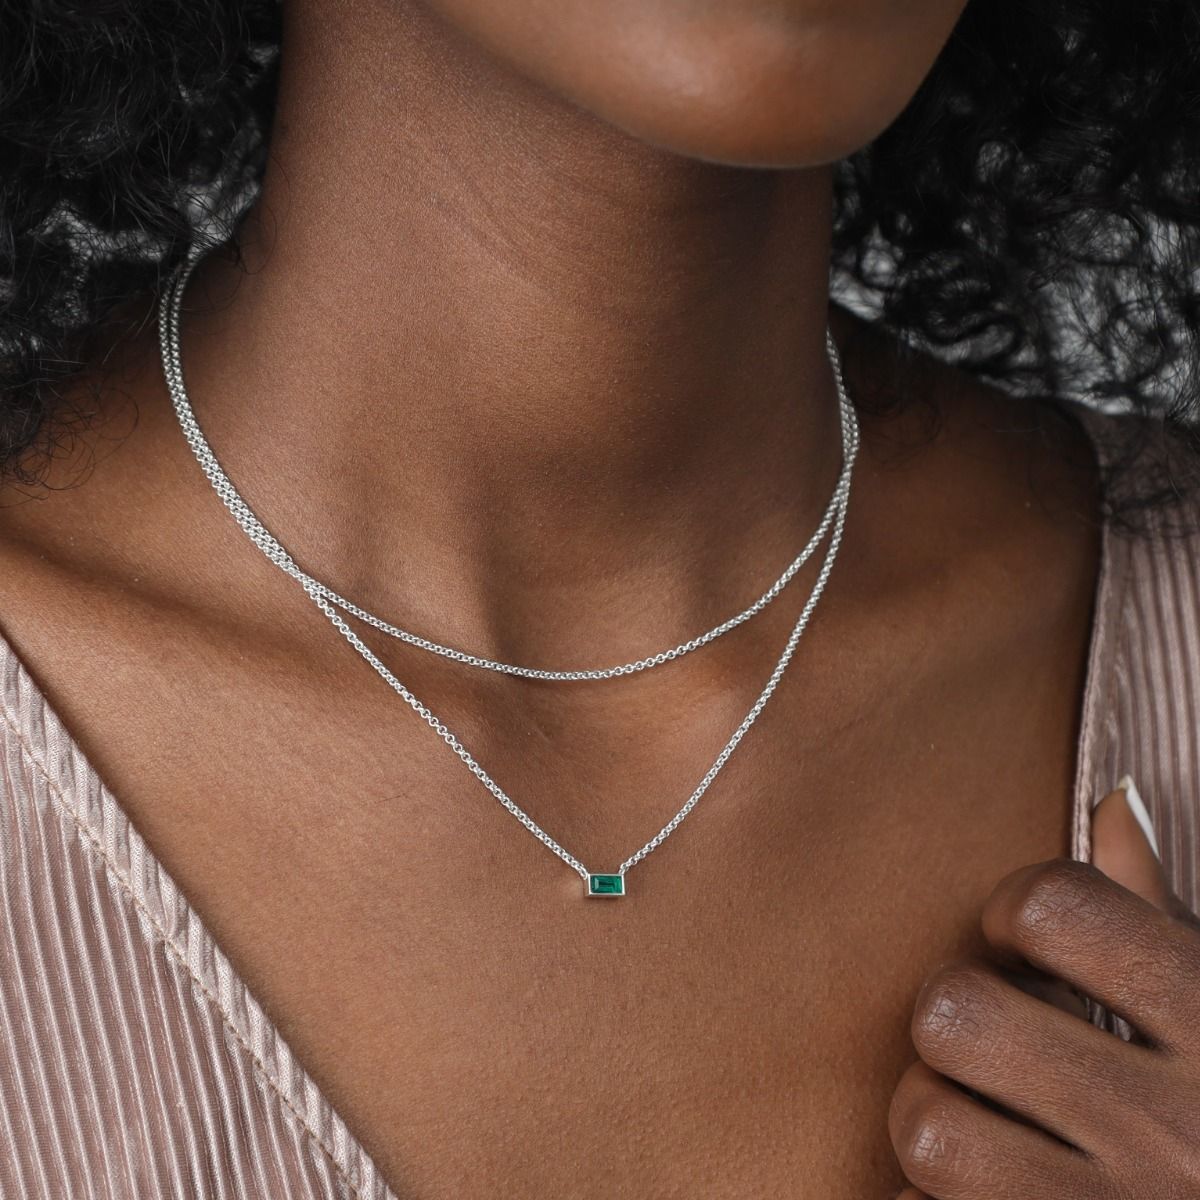 Genuine Emerald Necklace in Sterling Silver - Talisa Jewelry